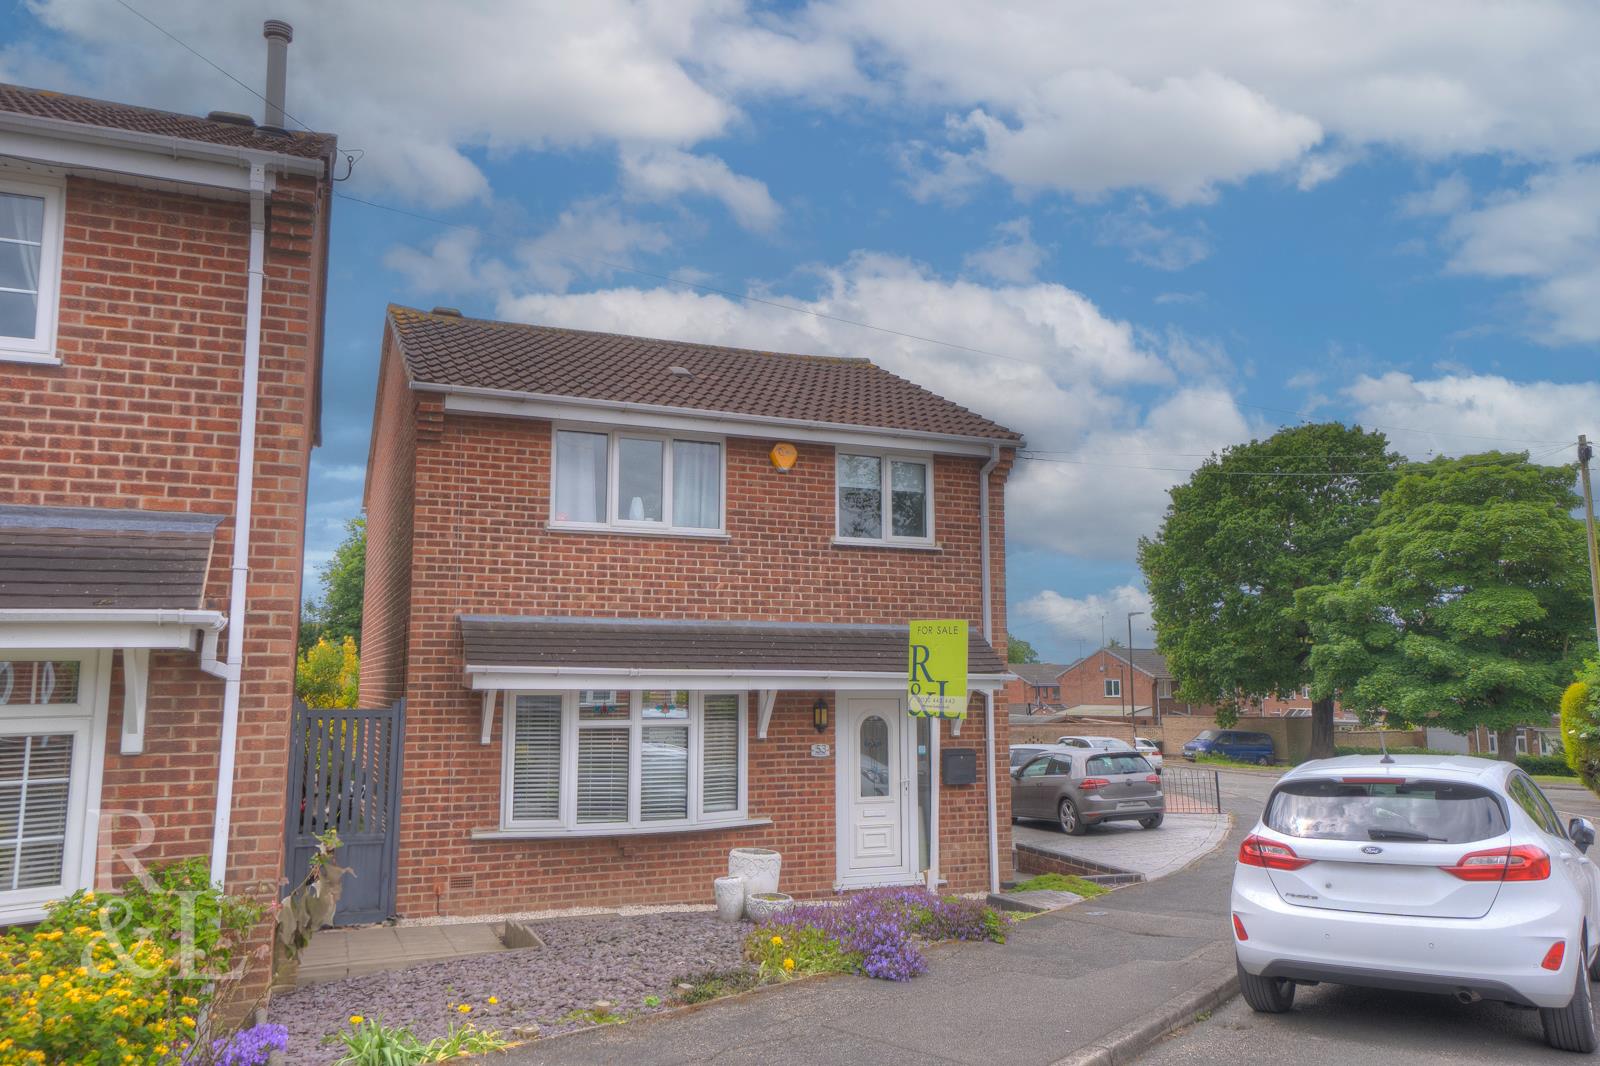 Property image for St. Johns Drive, Newhall, Swadlincote